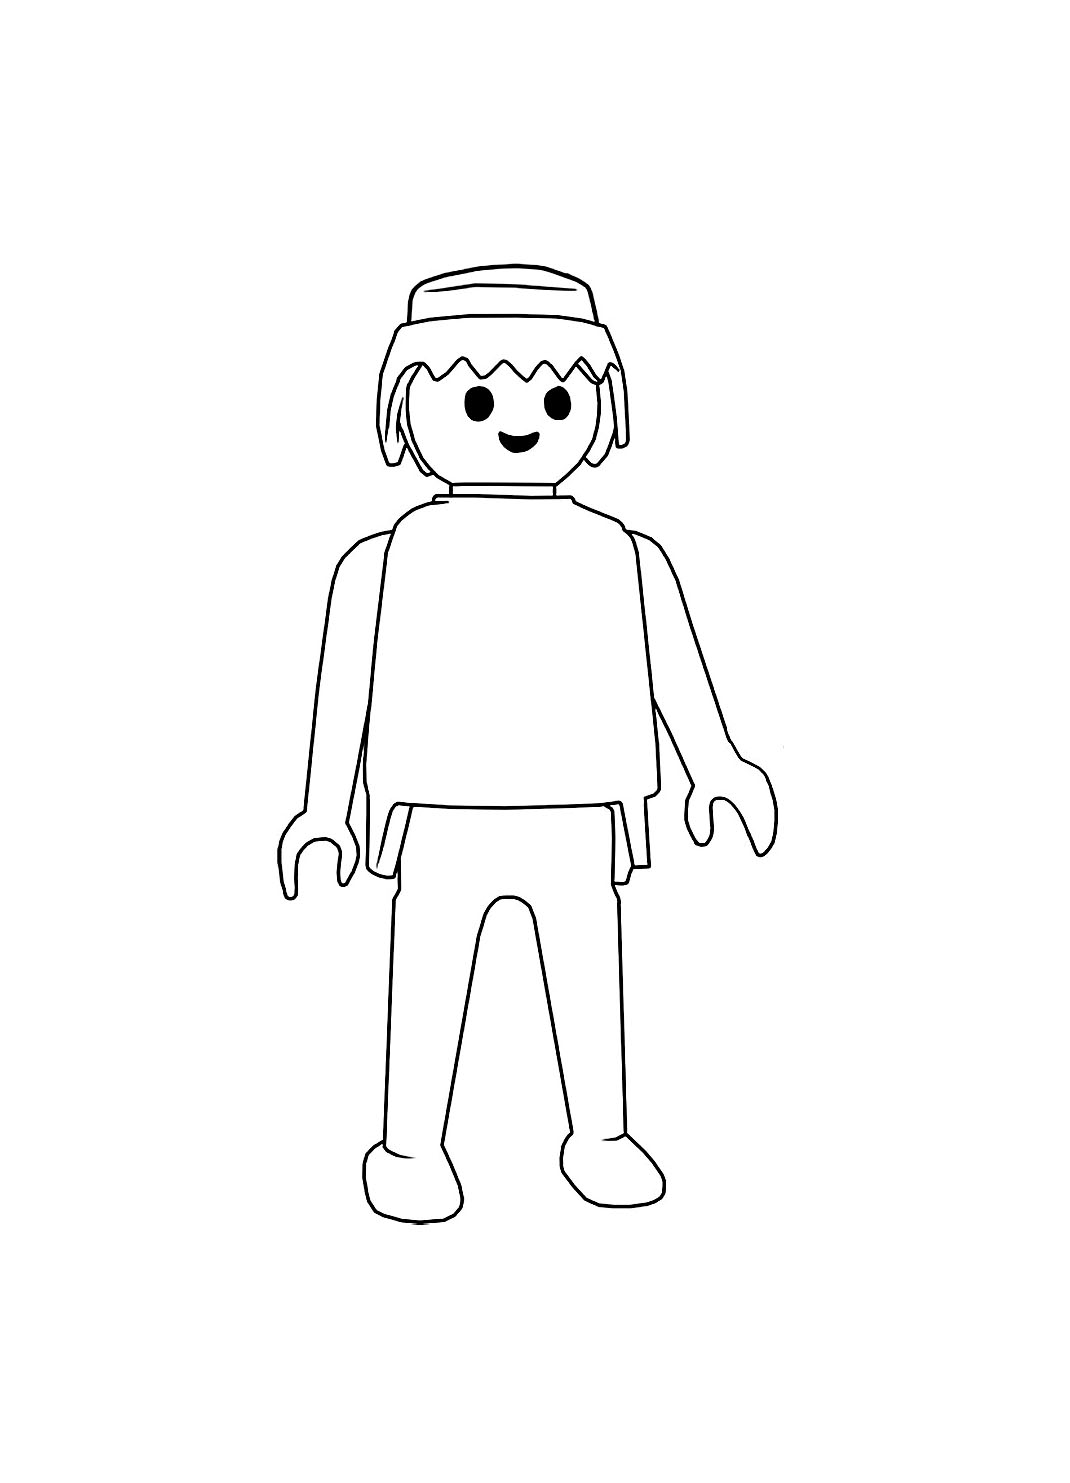 Playmobils coloring page to print and color